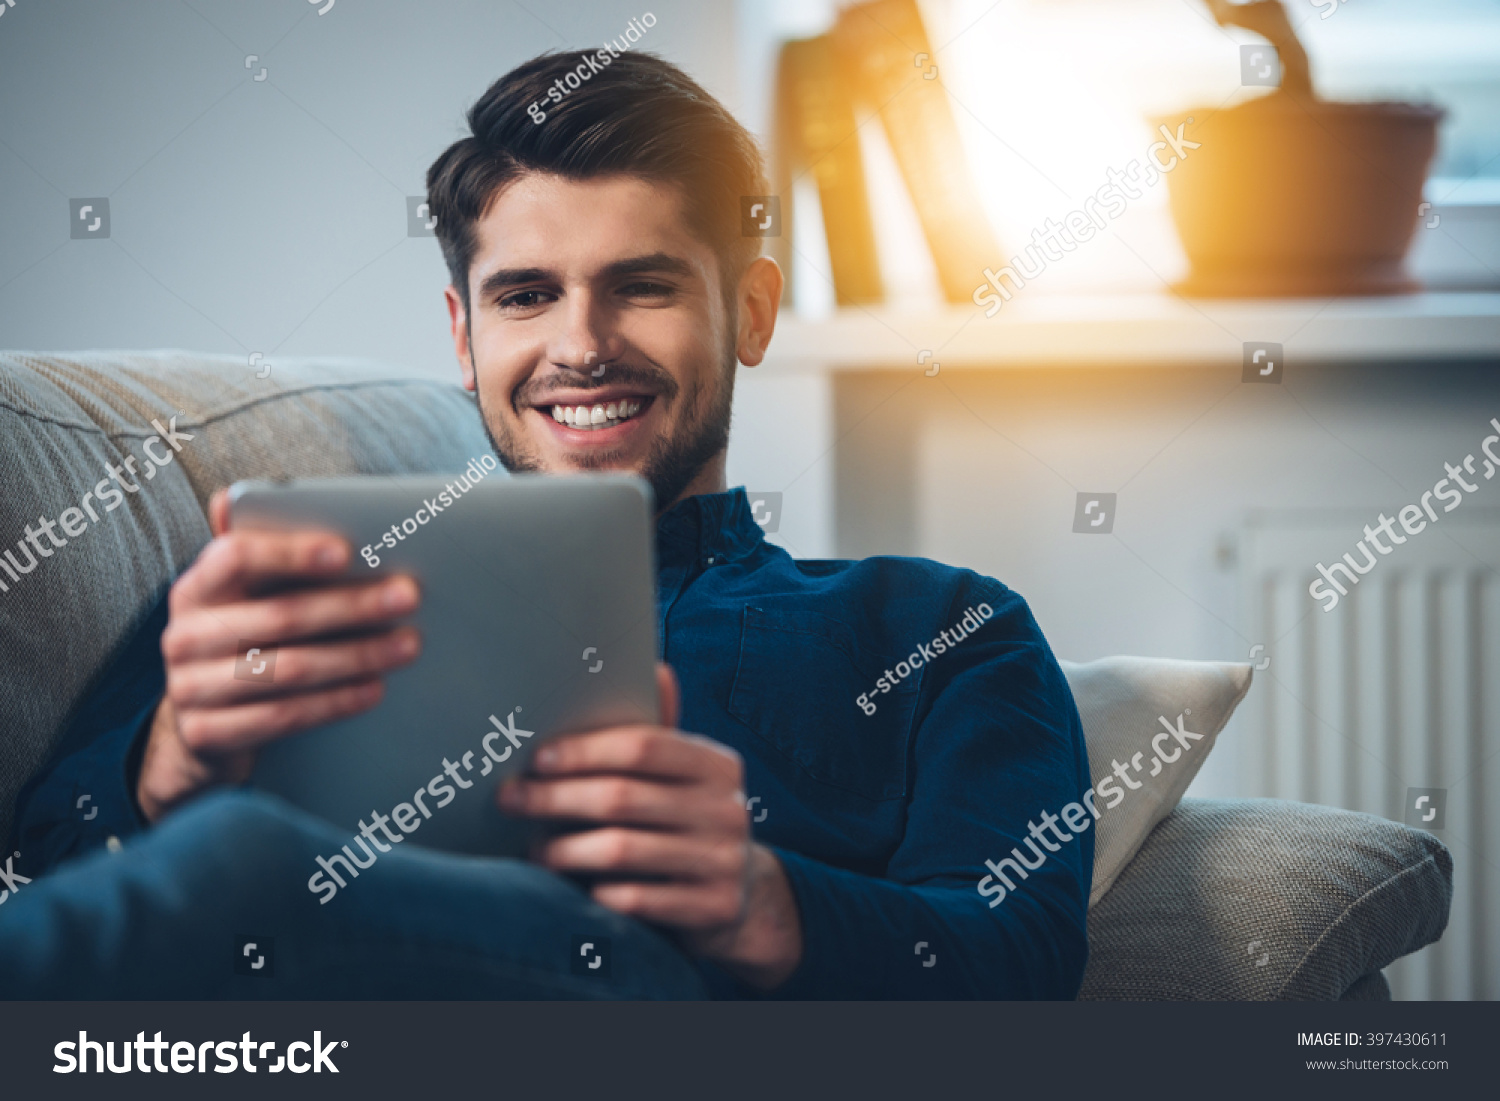 Spending great time at home. Close-up of handsome young man using his digital tablet with smile while lying down on the couch at home #397430611